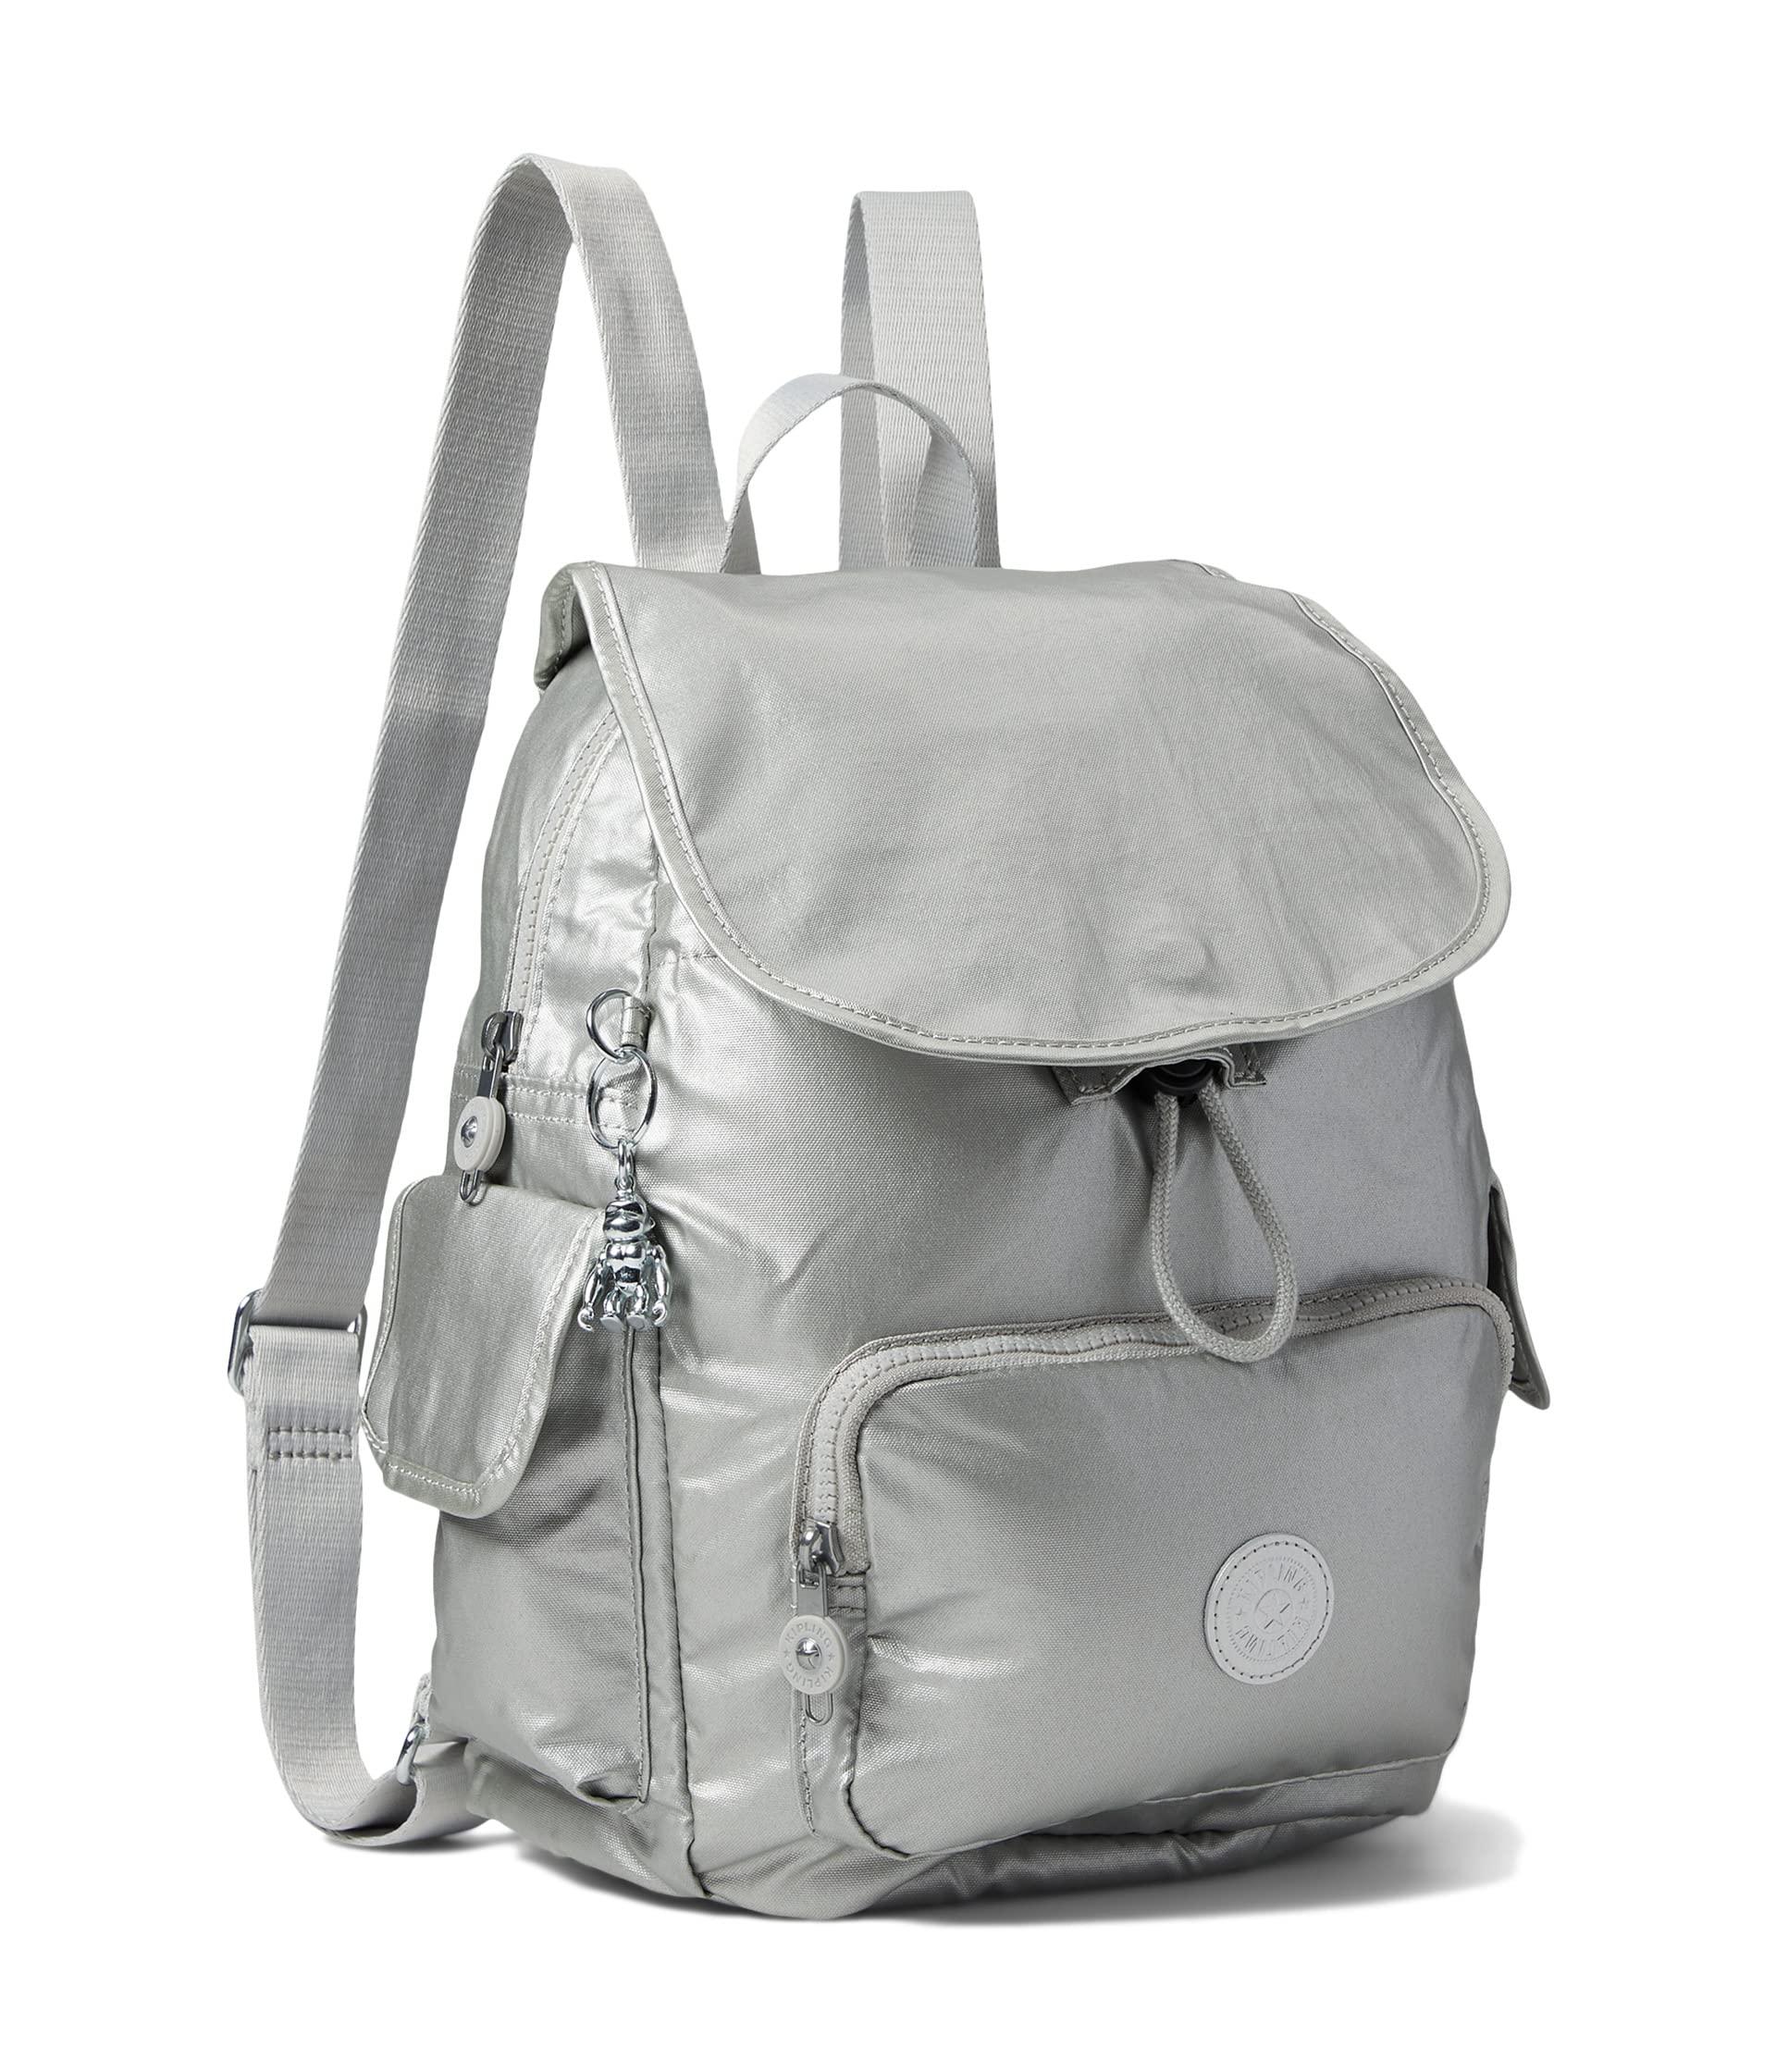 Kipling City Pack Small Backpack in Gray | Lyst